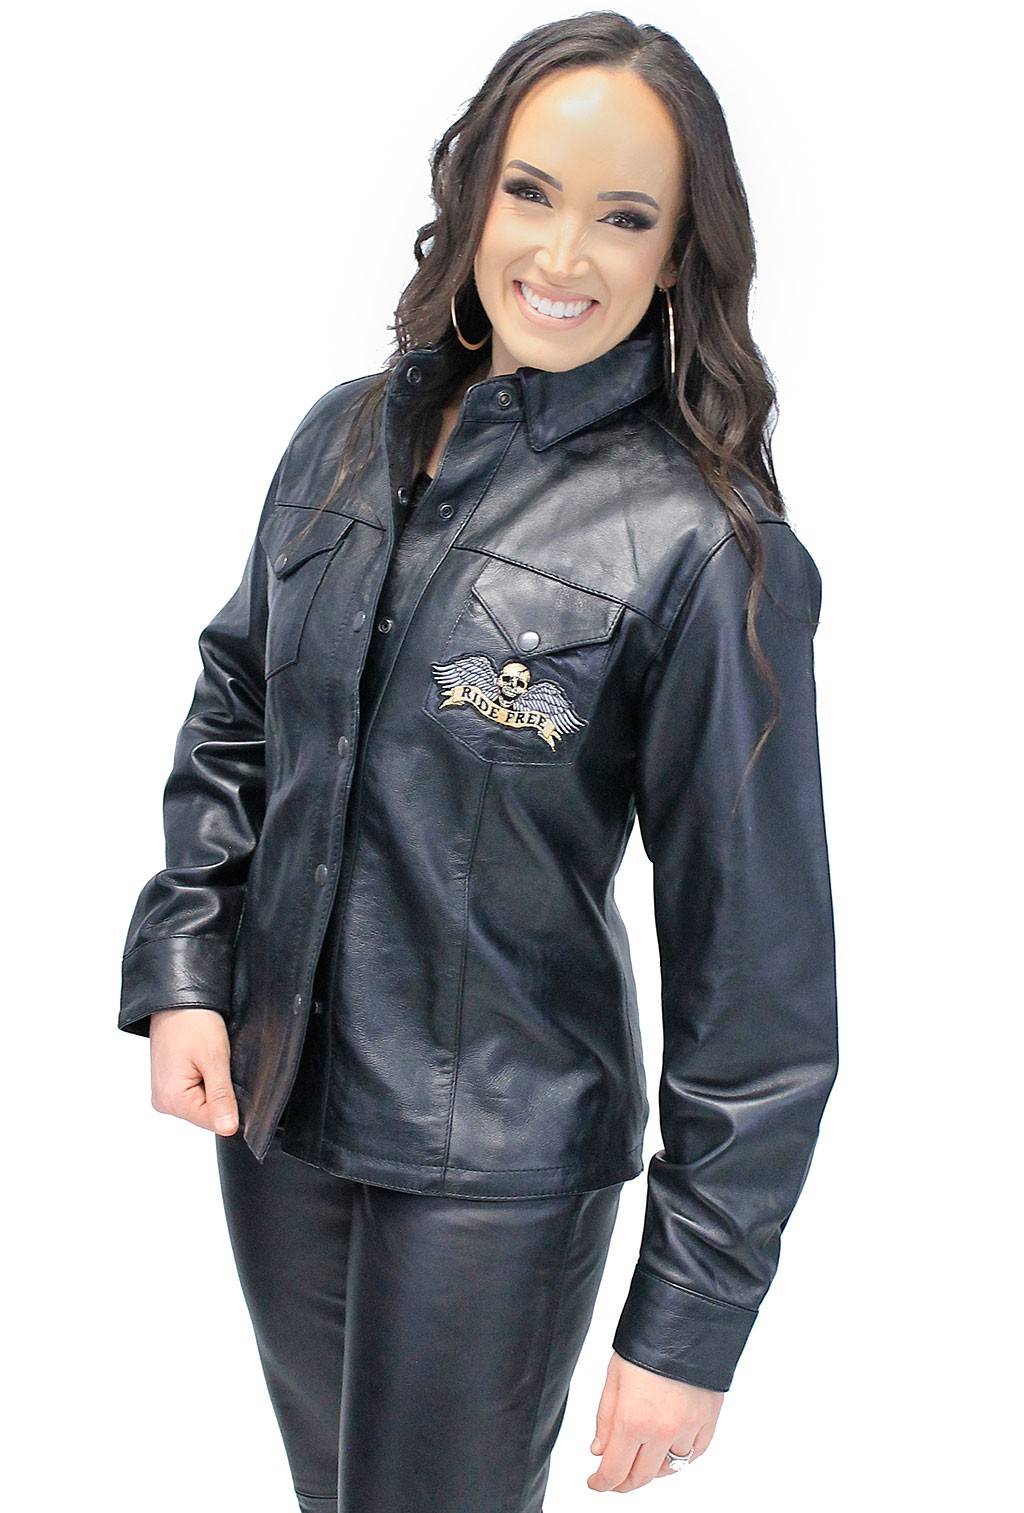 Lightweight sand color women's leather jacket that is on sale at a blowout price.